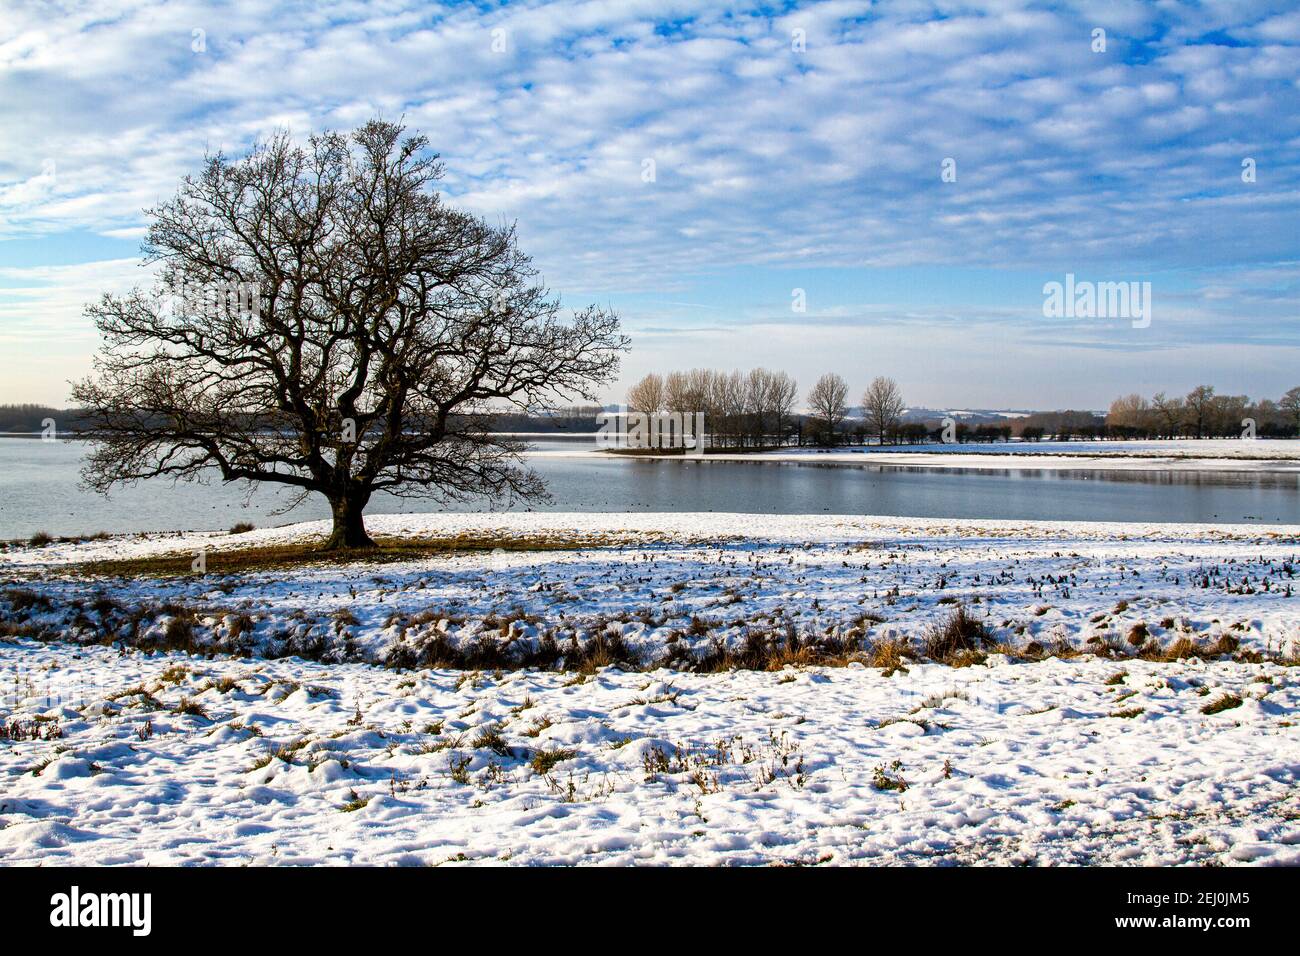 Snow covers the ground at Rutland Water, with copy space Stock Photo